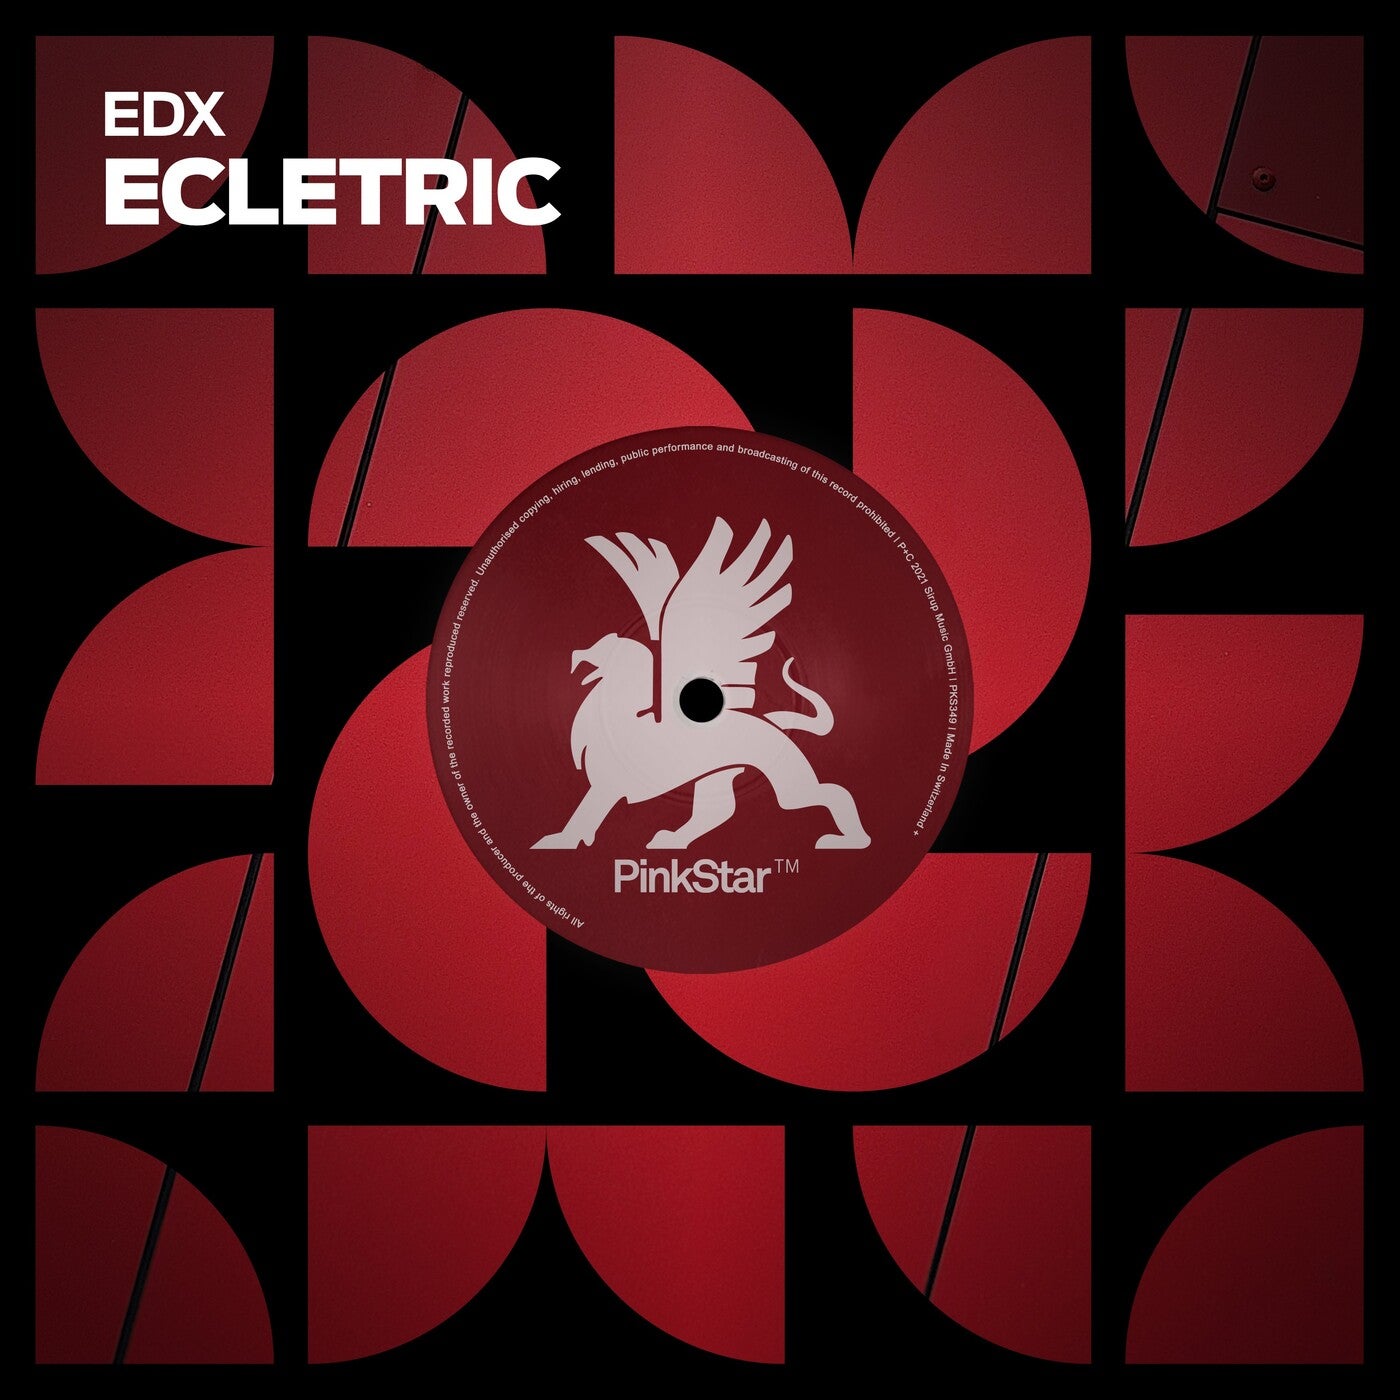 Edx - Ecletric (extended Mix) on Revolution Radio